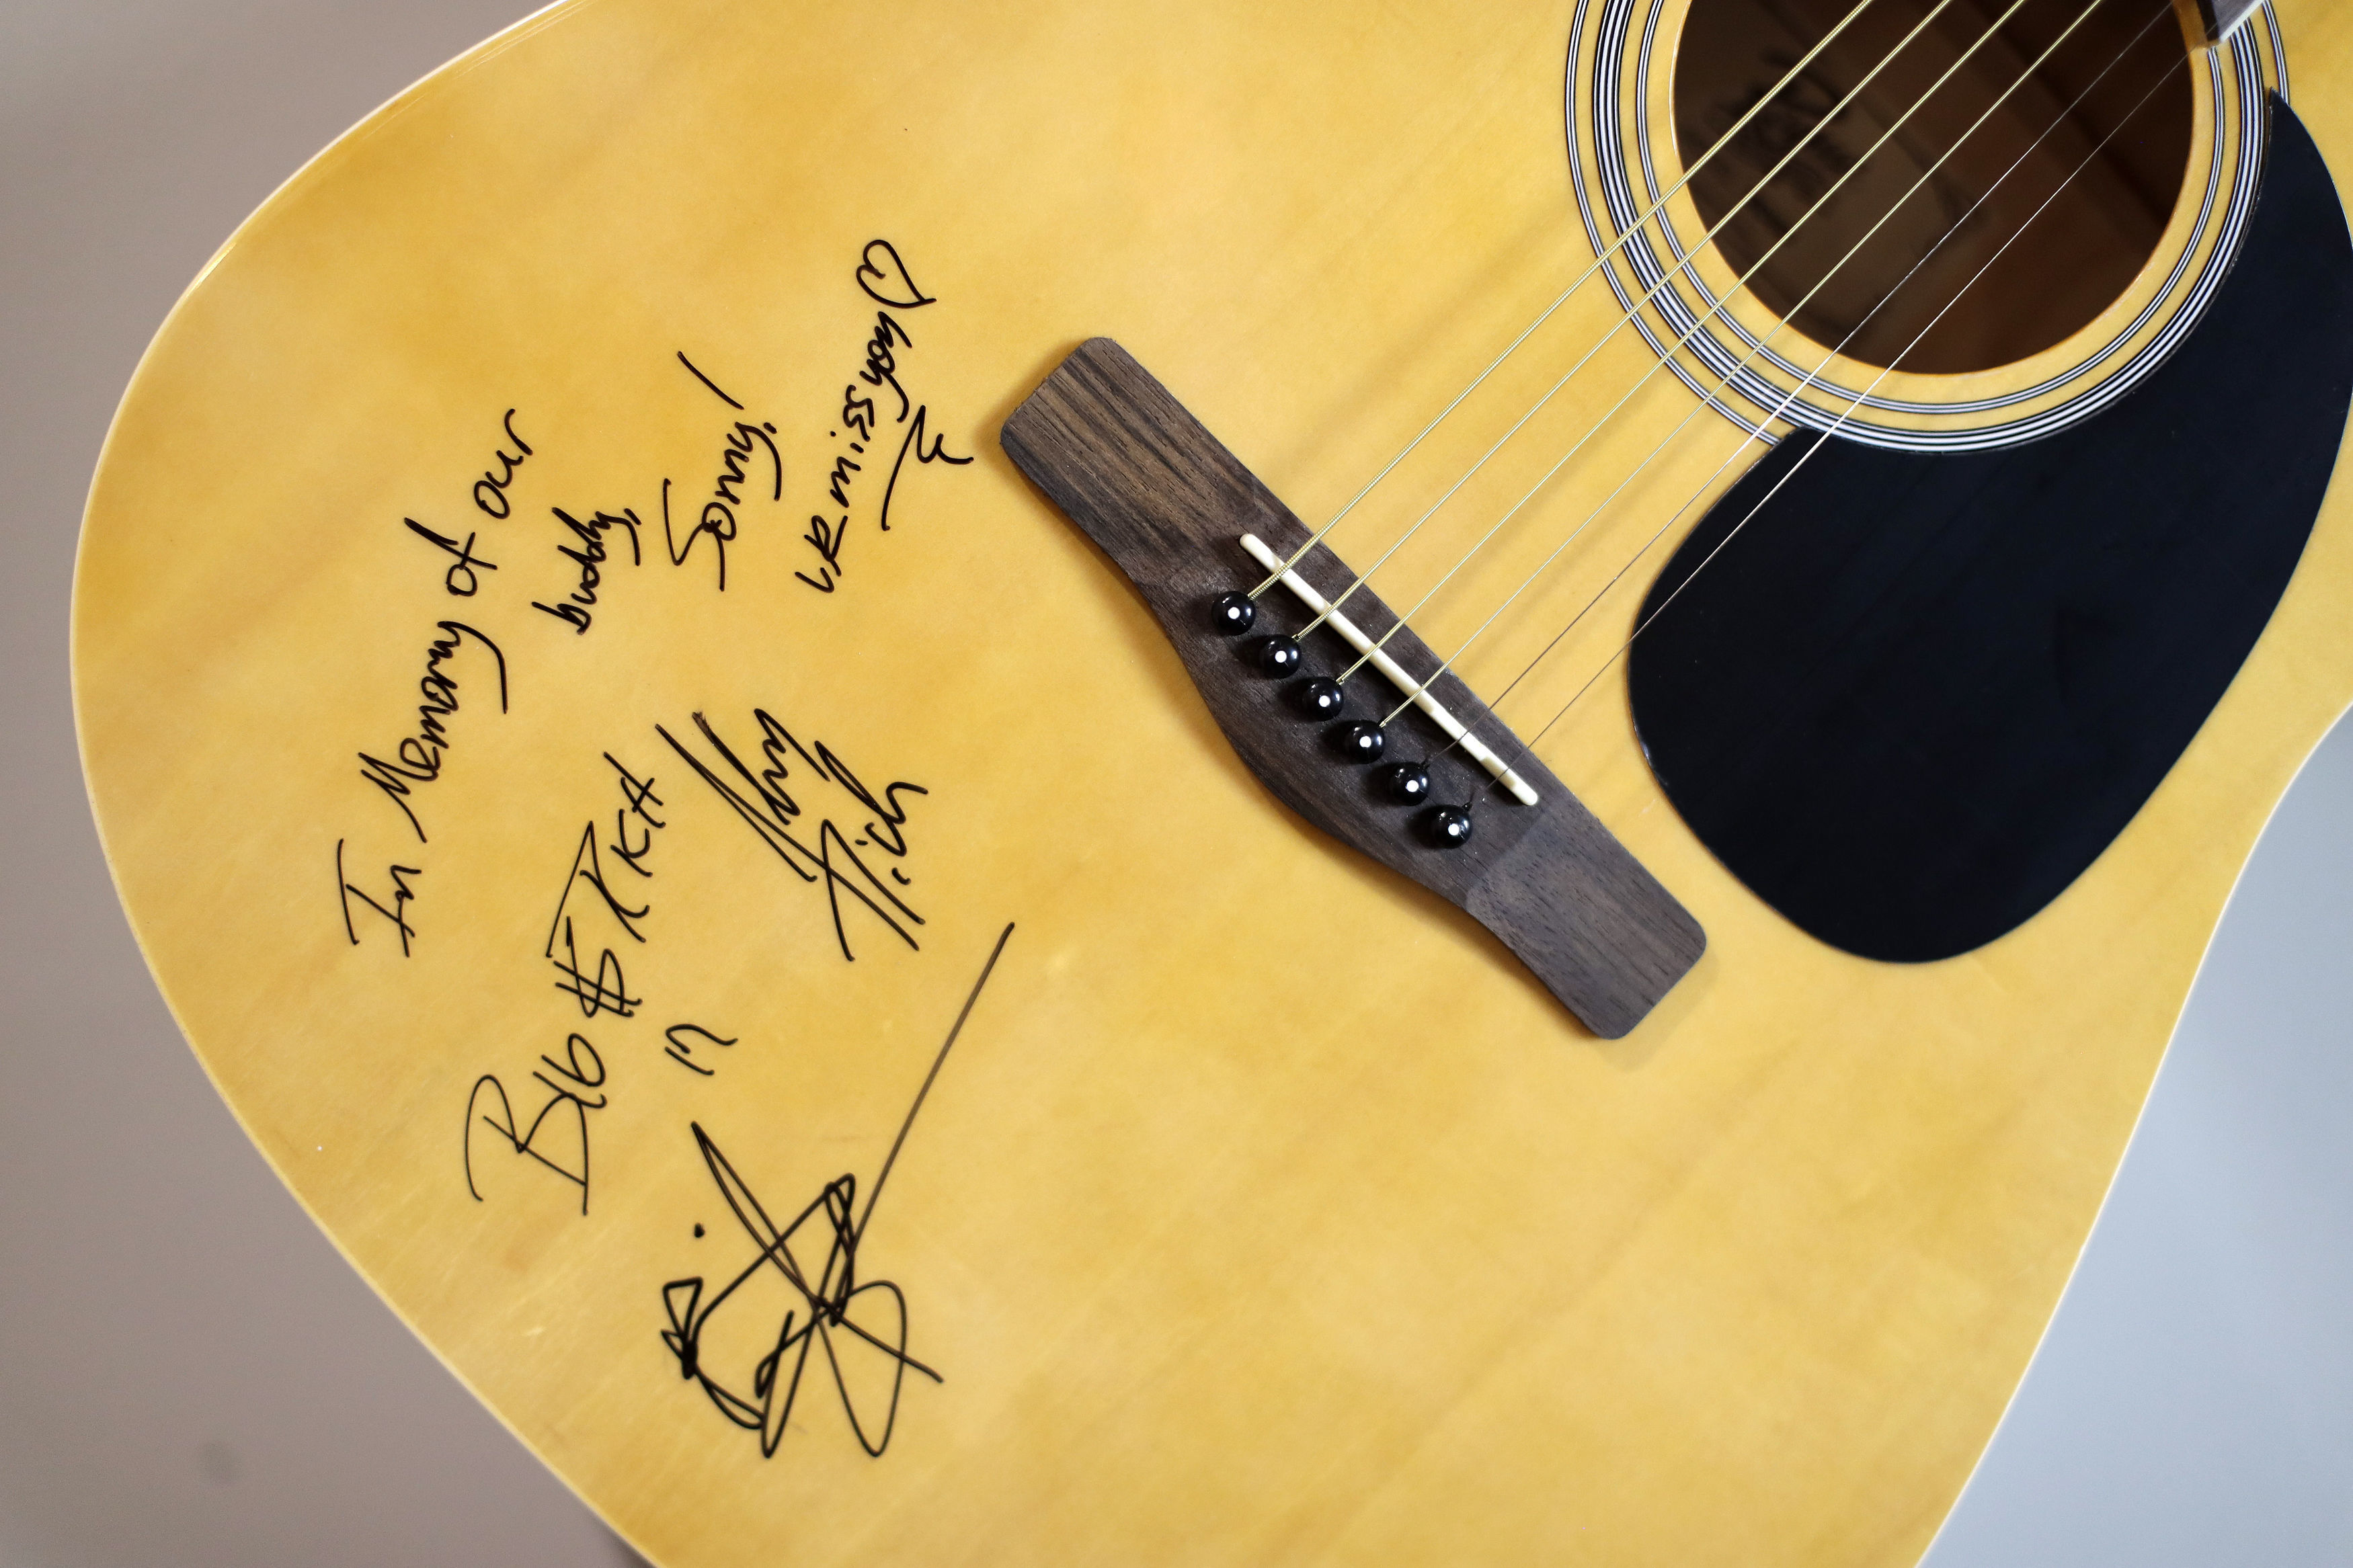 A guitar autographed by the country music duo Big and Rich